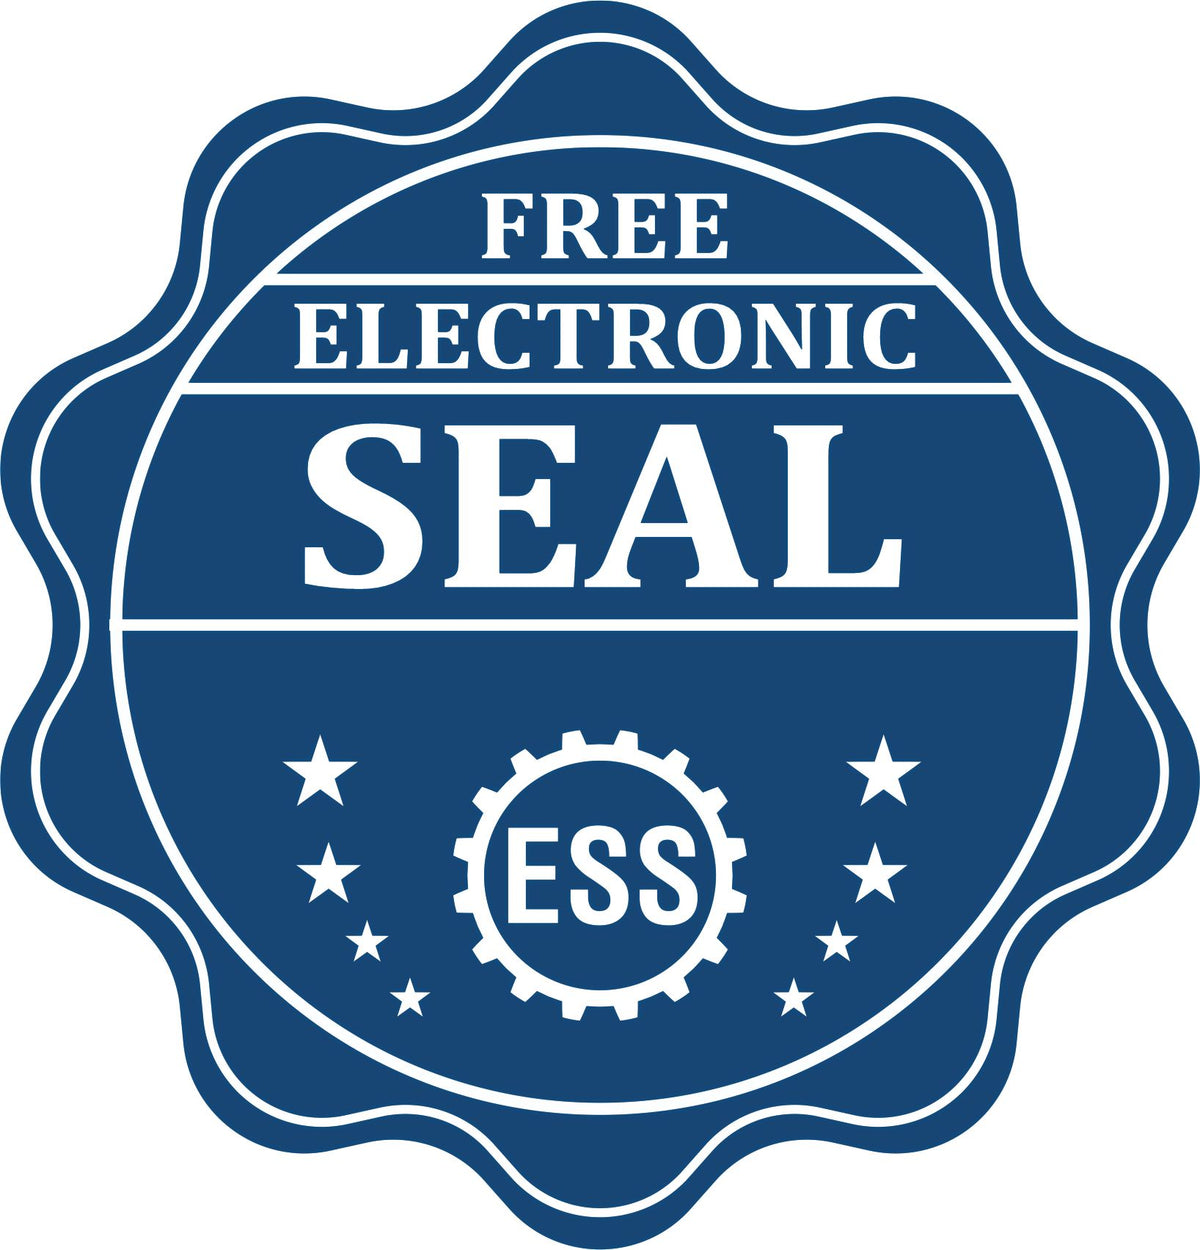 A badge showing a free electronic seal for the State of Mississippi Extended Long Reach Geologist Seal with stars and the ESS gear on the emblem.